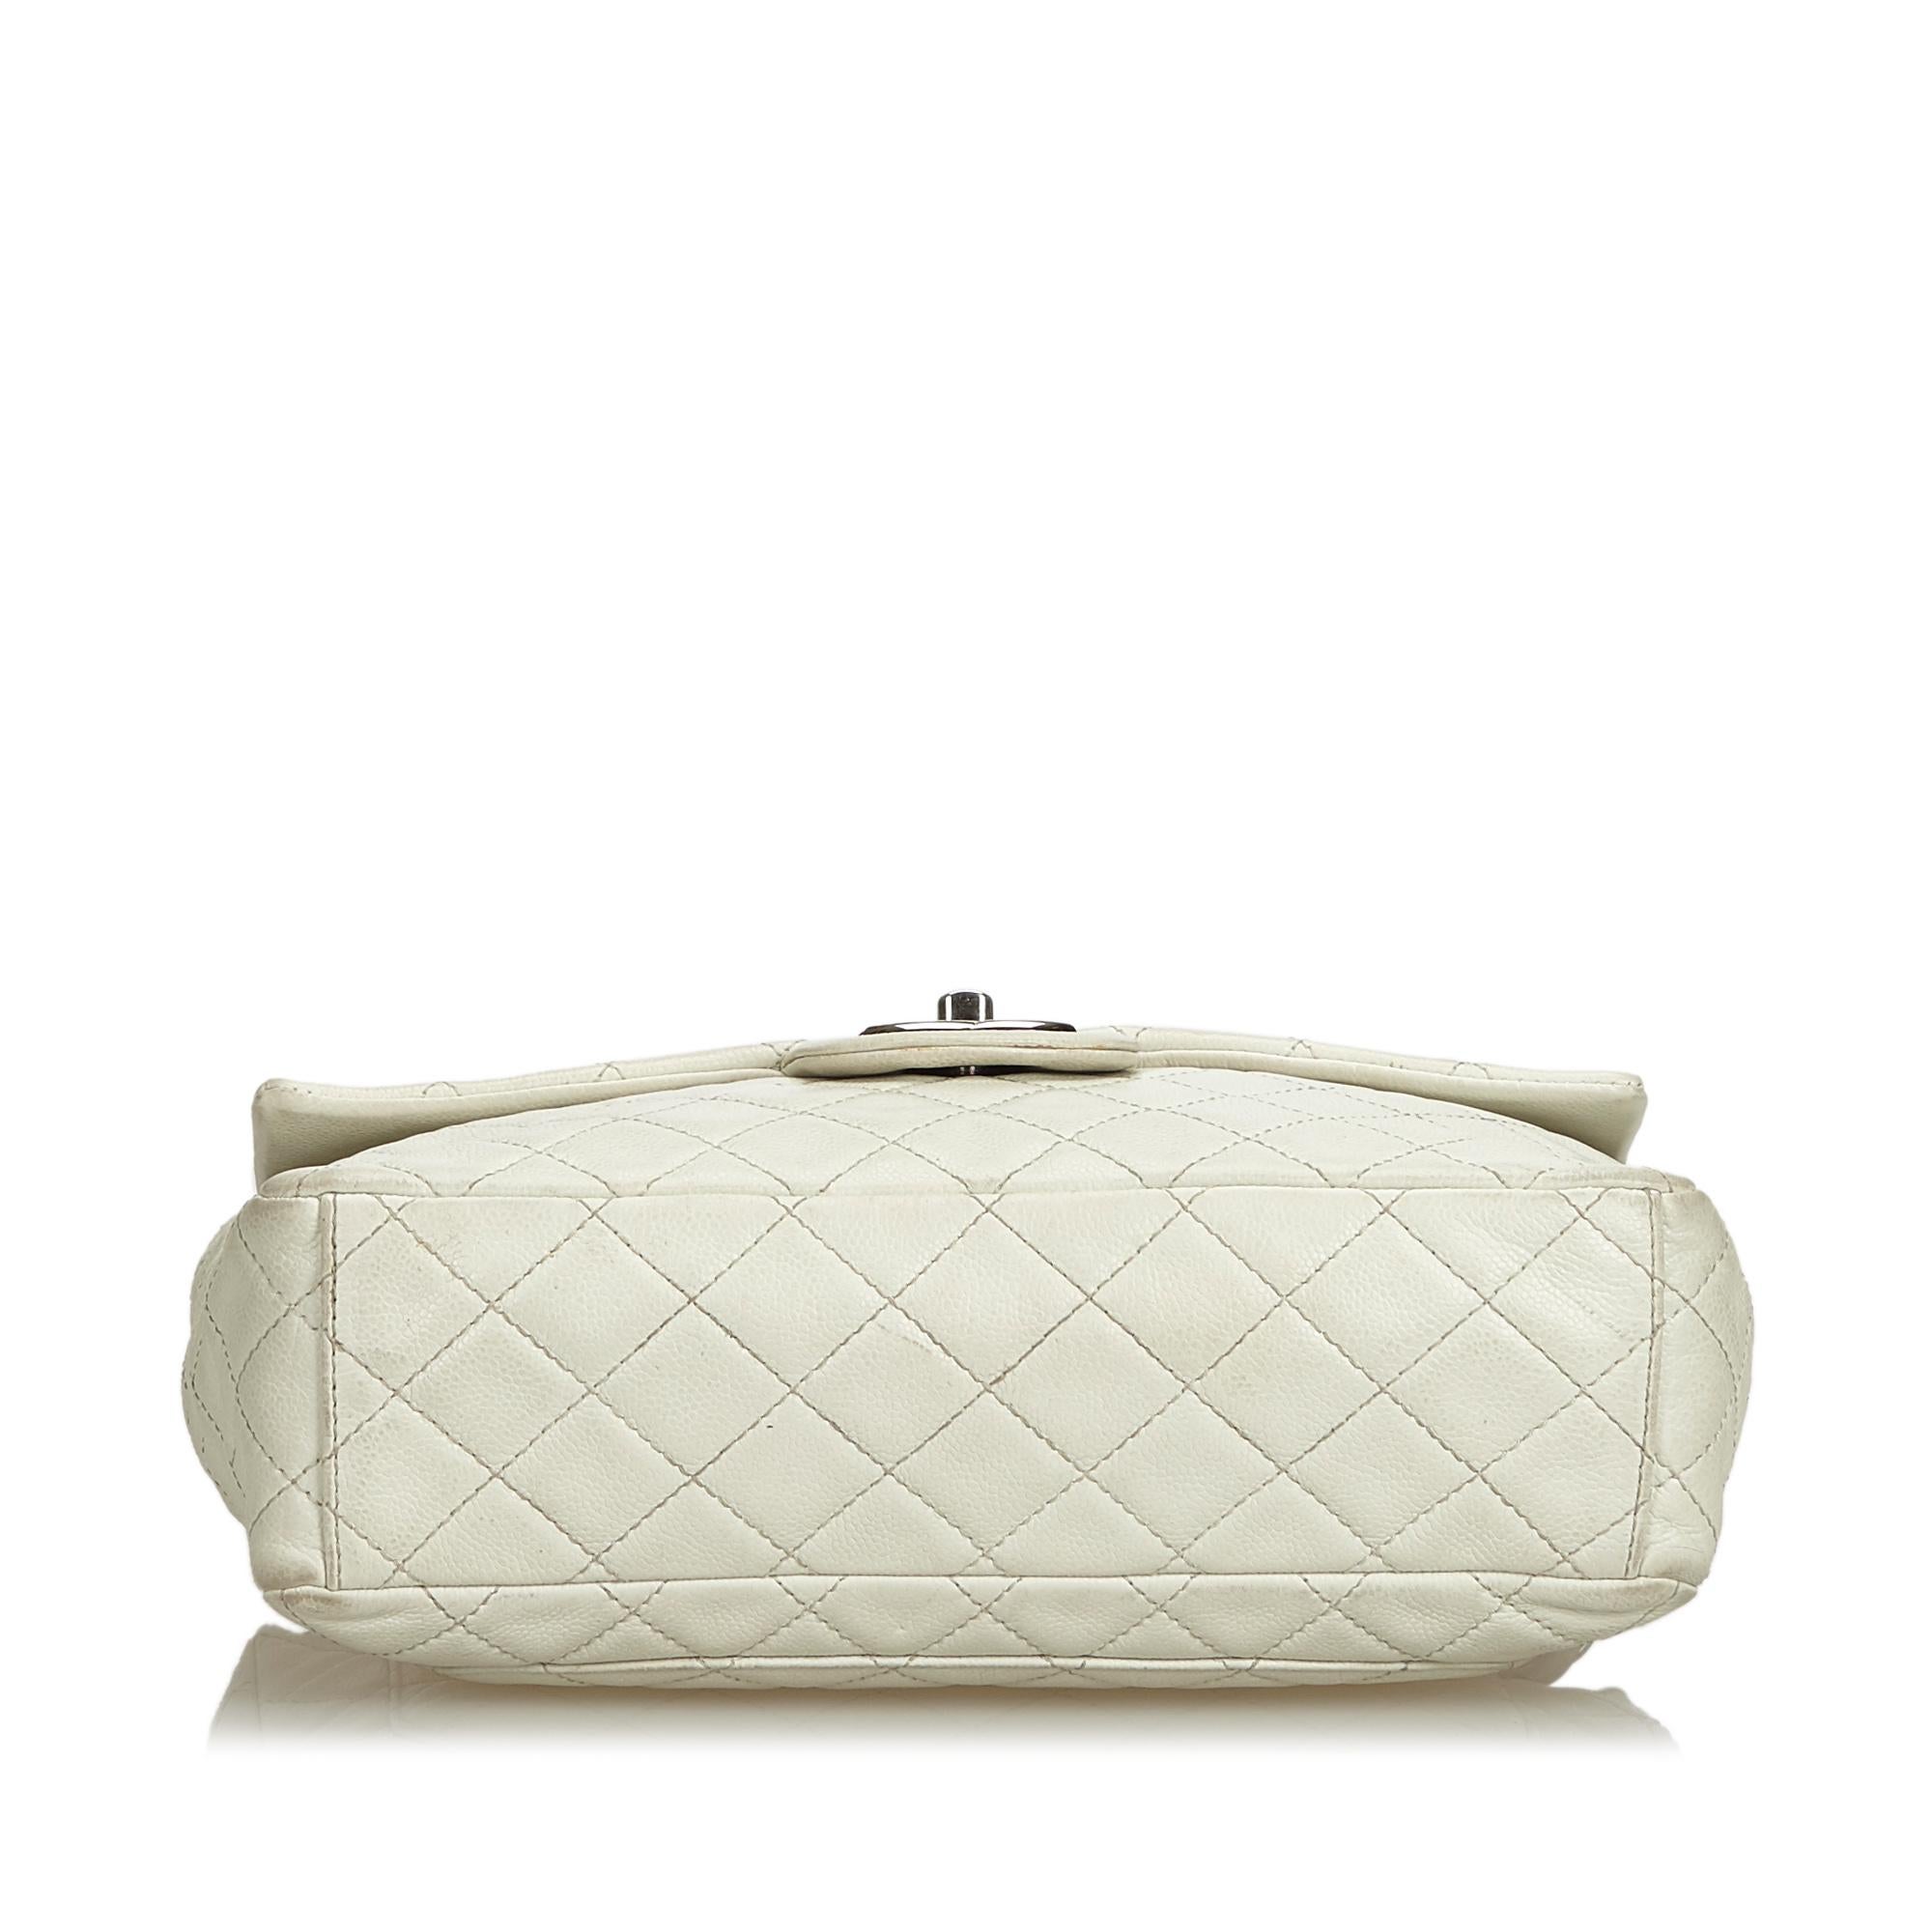 Chanel White Caviar Leather Leather Classic Jumbo Caviar Single Flap Bag France In Good Condition For Sale In Orlando, FL